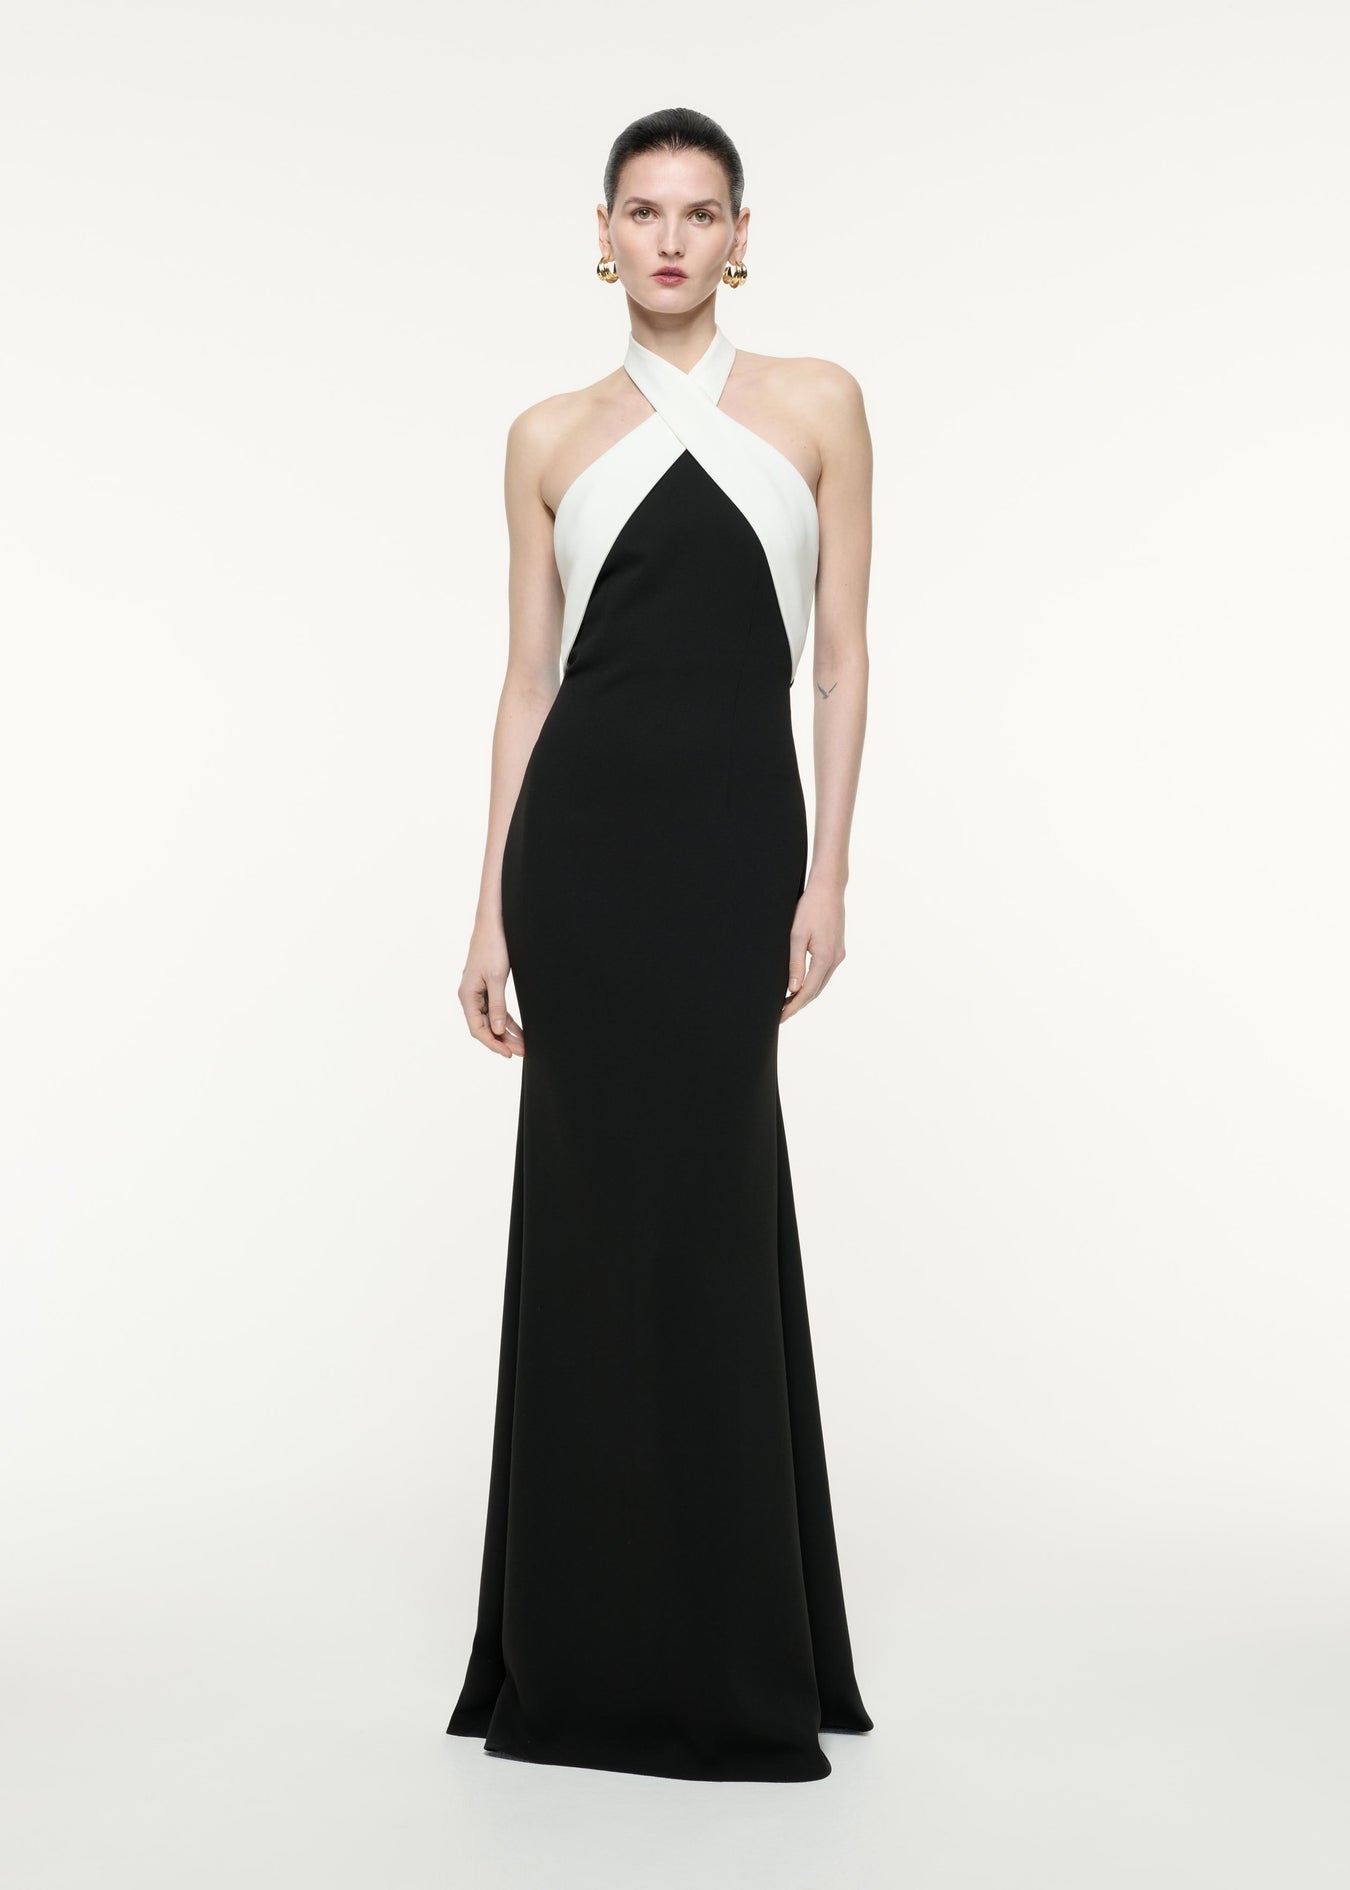 A front view image of a model wearing the Halter Neck Gown in Monochrome